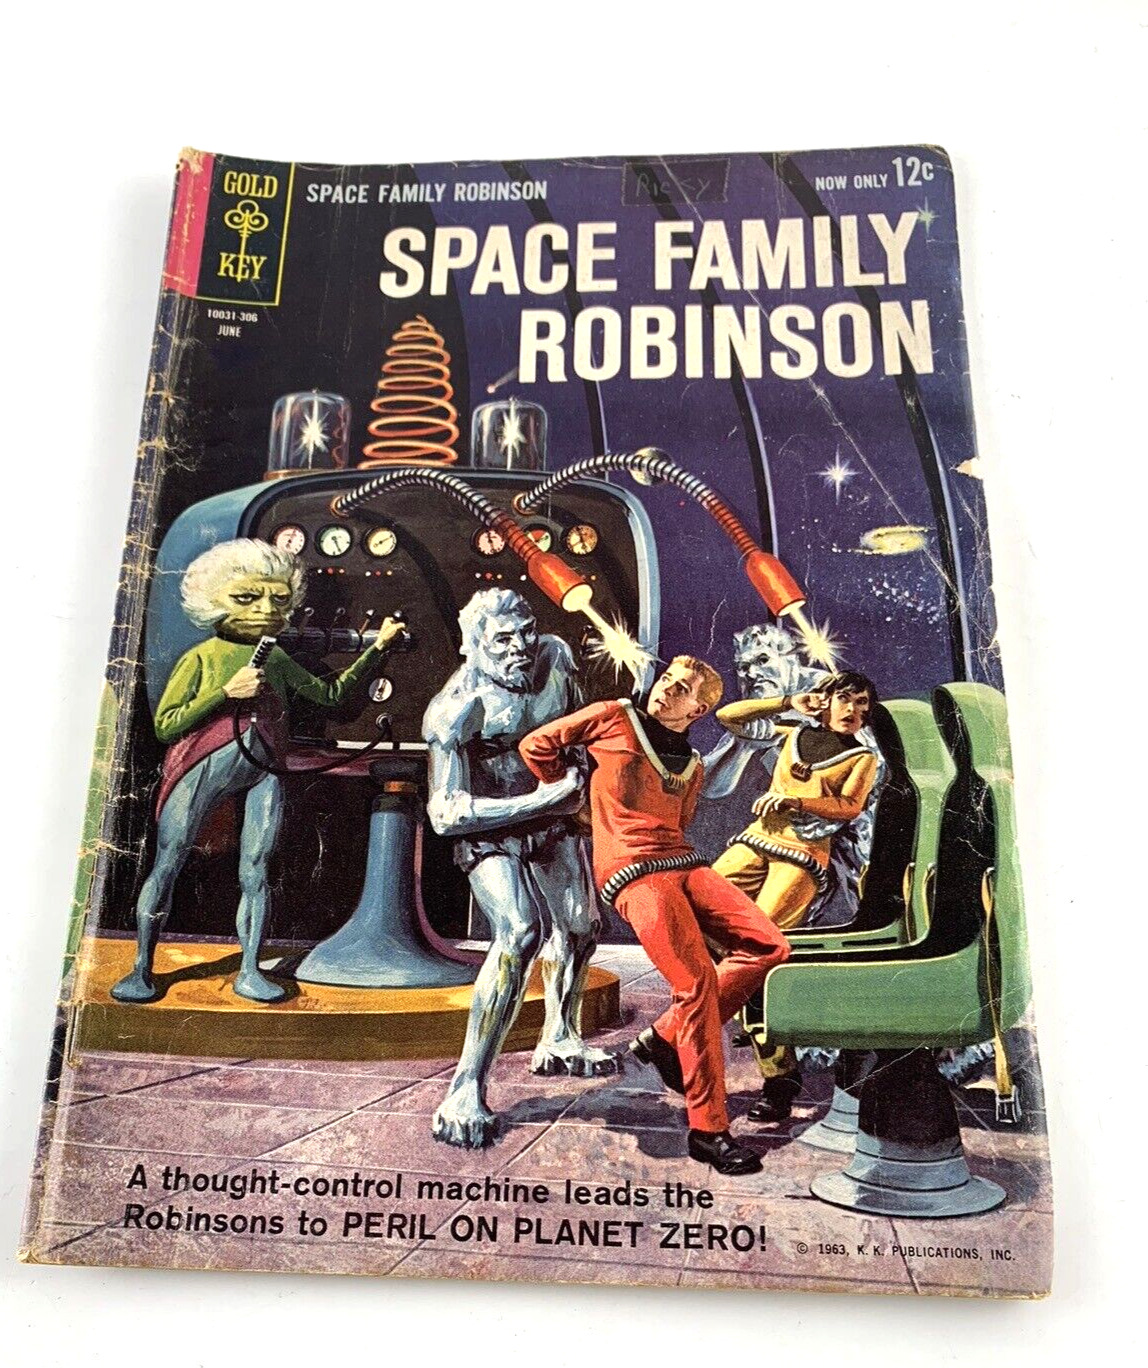 Space Family Robinson #3  1963 Good Thought control machine leads to Planet Zero